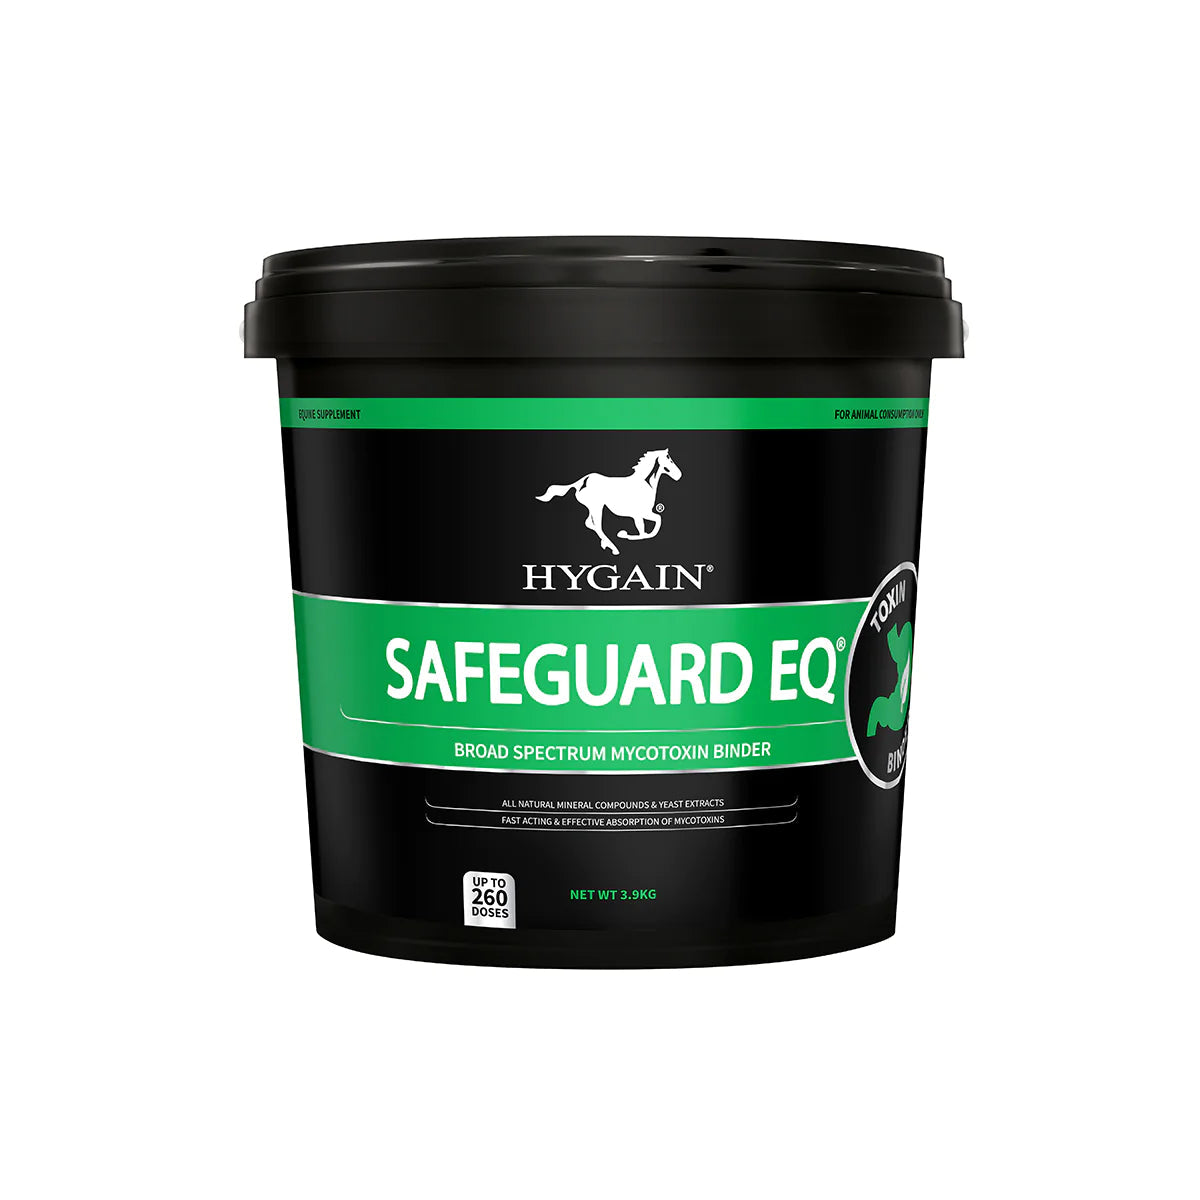 HYGAIN FEED SUPPLEMENTS 3.9KG Hygain Safeguard Eq Toxin Binder For Horses